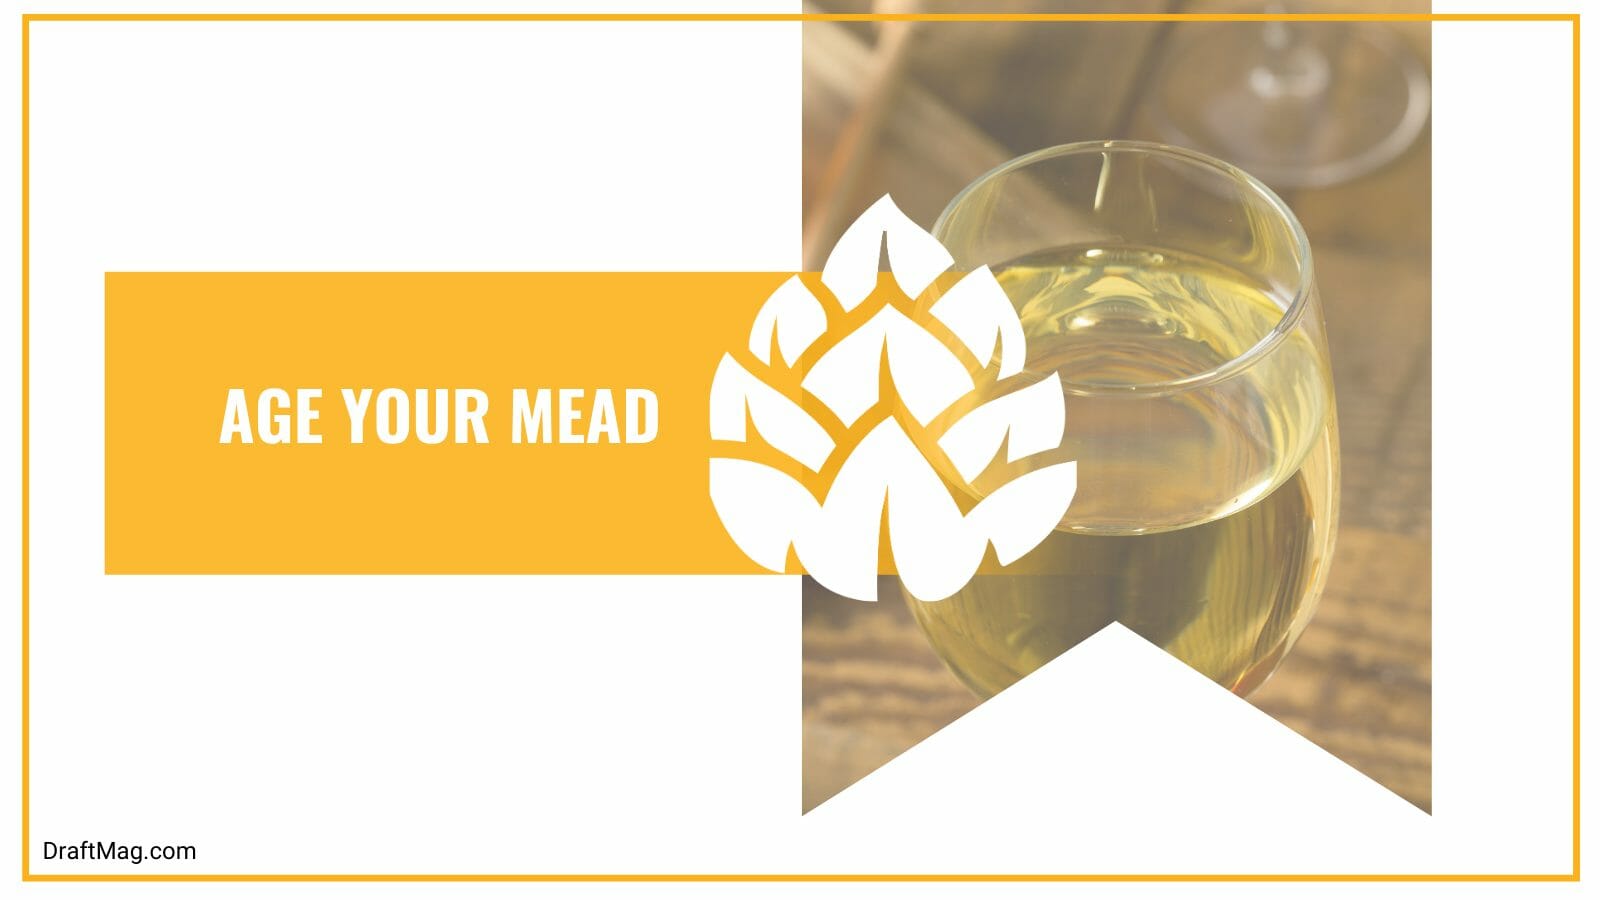 Duration of Mead Age